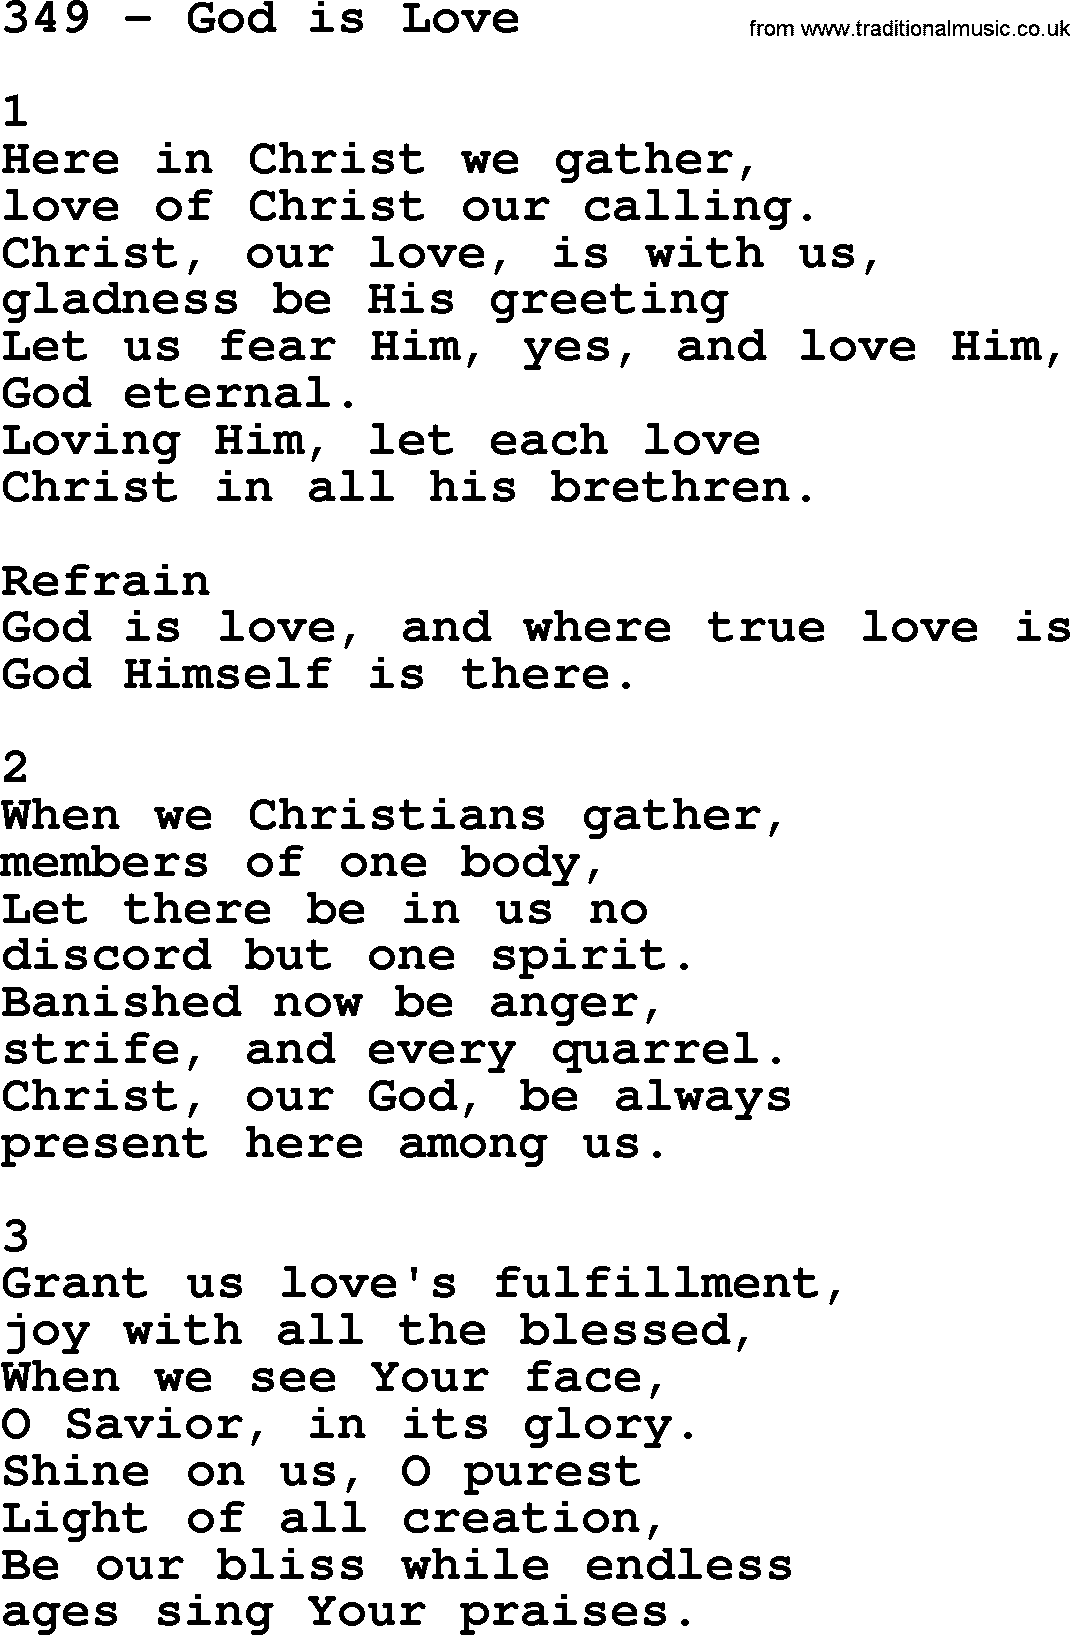 Complete Adventis Hymnal, title: 349-God Is Love, with lyrics, midi, mp3, powerpoints(PPT) and PDF,